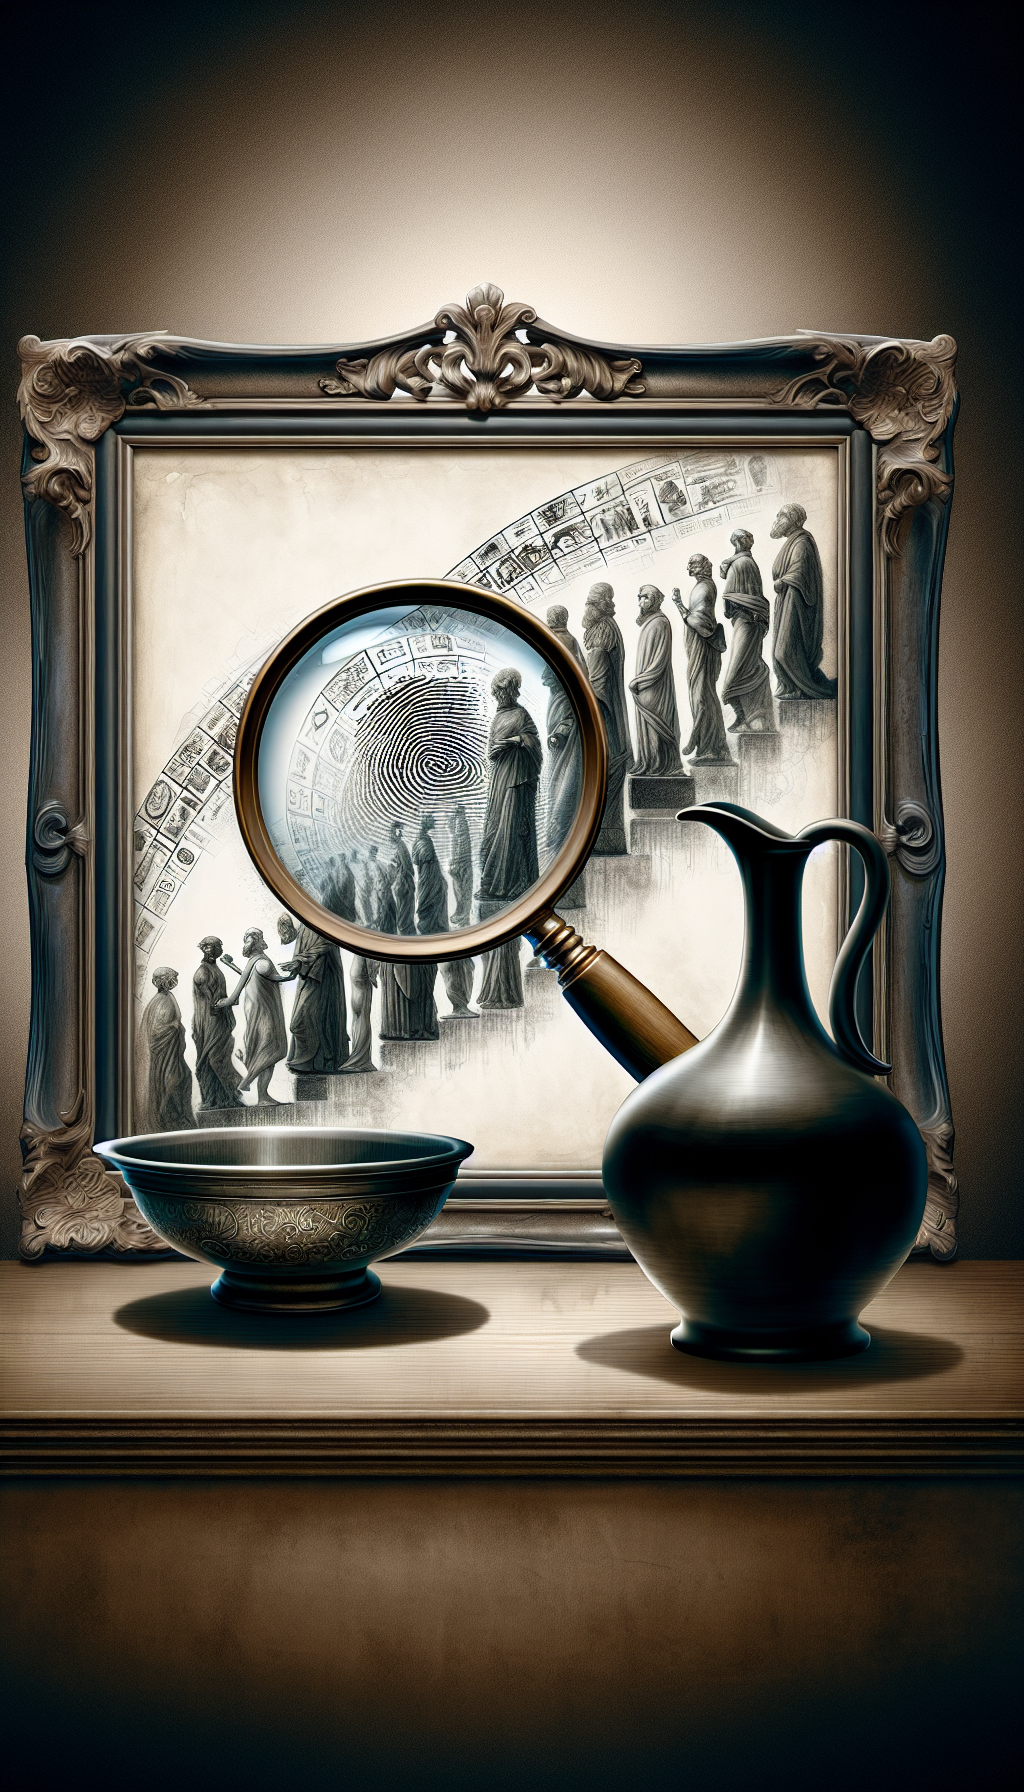 Within a frame shaped like an elegant antique mirror, a magnifying glass hovers over the intricate mark on a wash bowl and pitcher set, subtly revealing a ghosted timeline in the background that fades from past to present. The pitcher and bowl are detailed in a semi-realistic style while the timeline features faded, sketch-like historical icons, suggesting the passage of time through art styles.